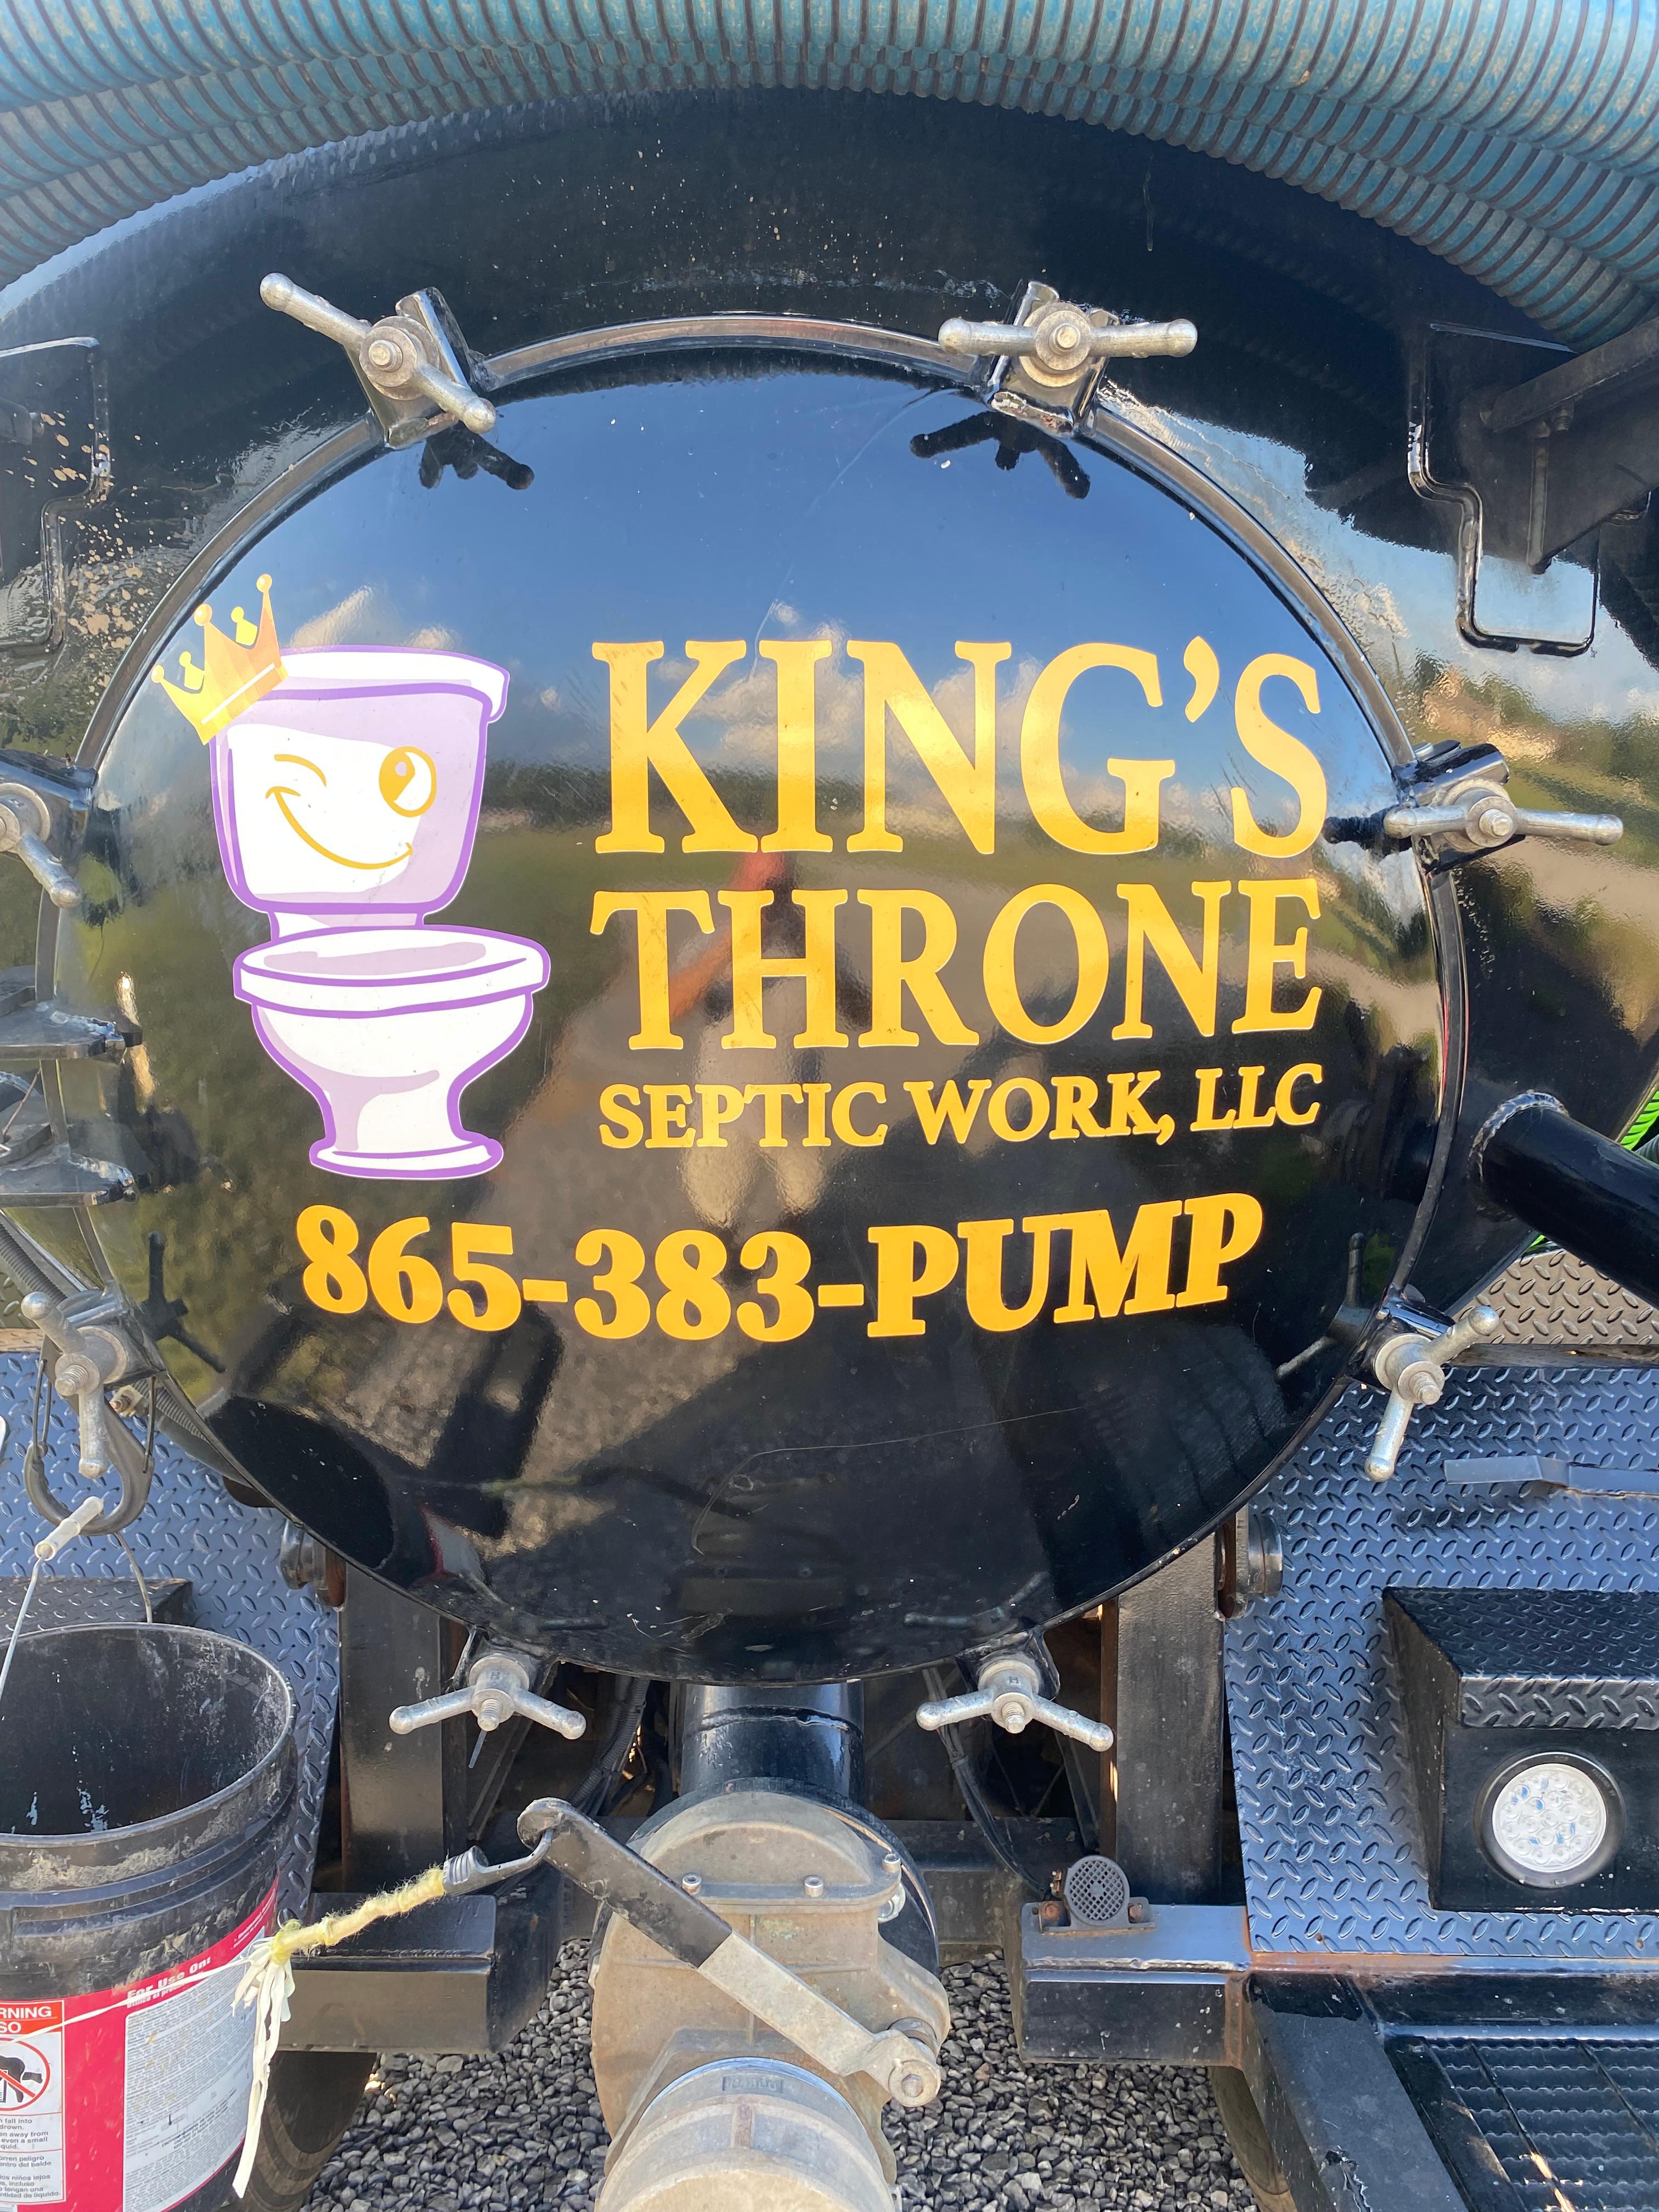 King's Throne Septic Work LLC offers professional septic pumping services to keep your septic system in optimal condition. Regular septic tank pumping is essential for preventing backups and maintaining the efficiency of your wastewater treatment system.